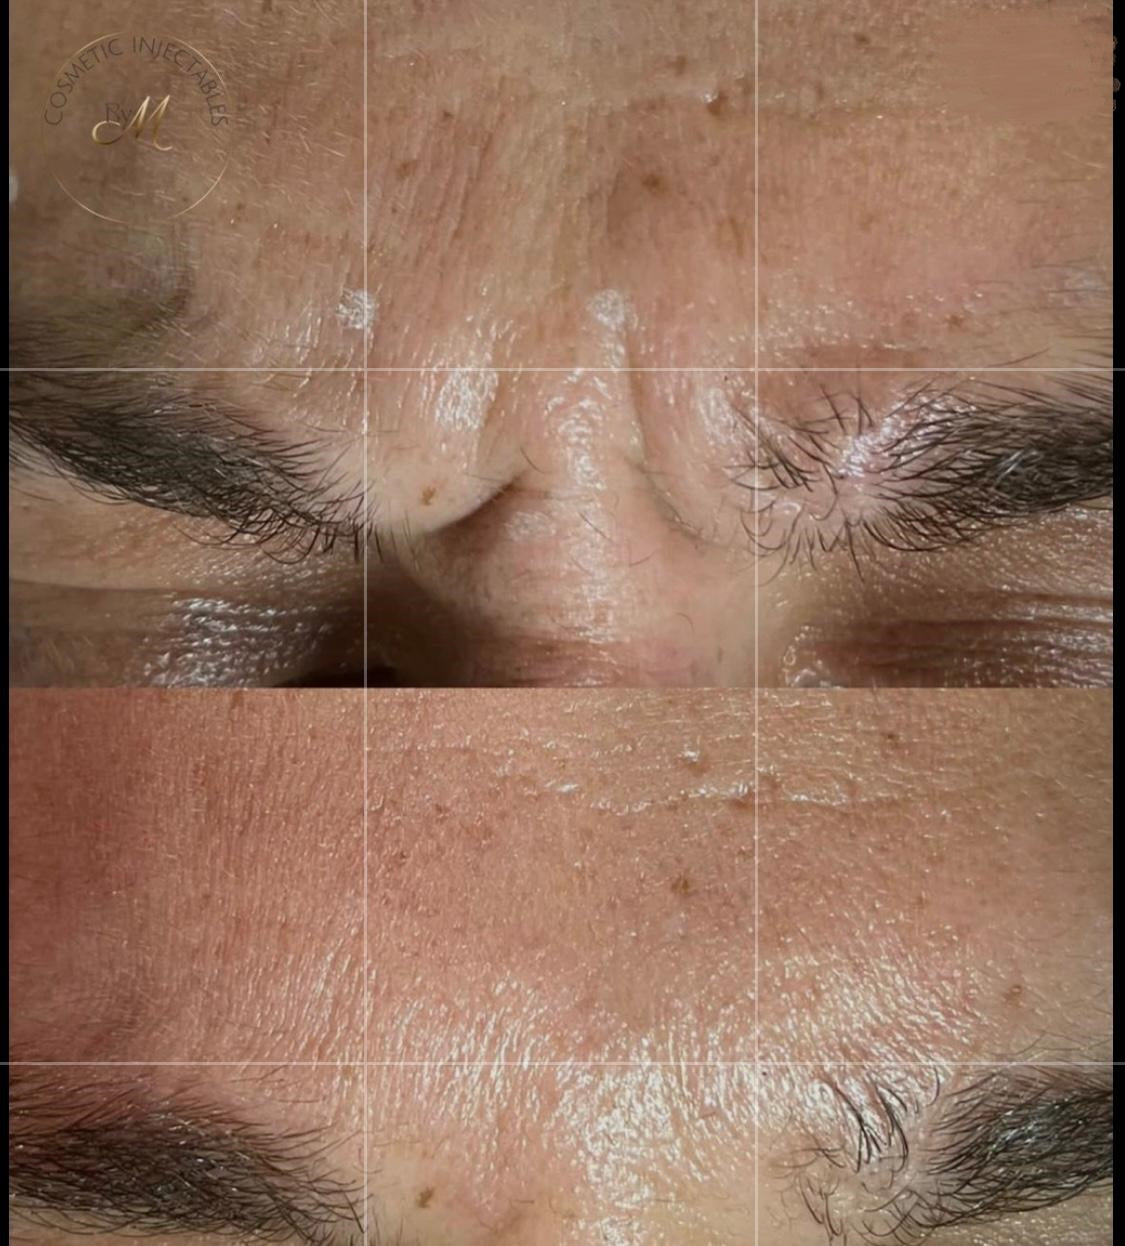 before and after anti-wrinkle